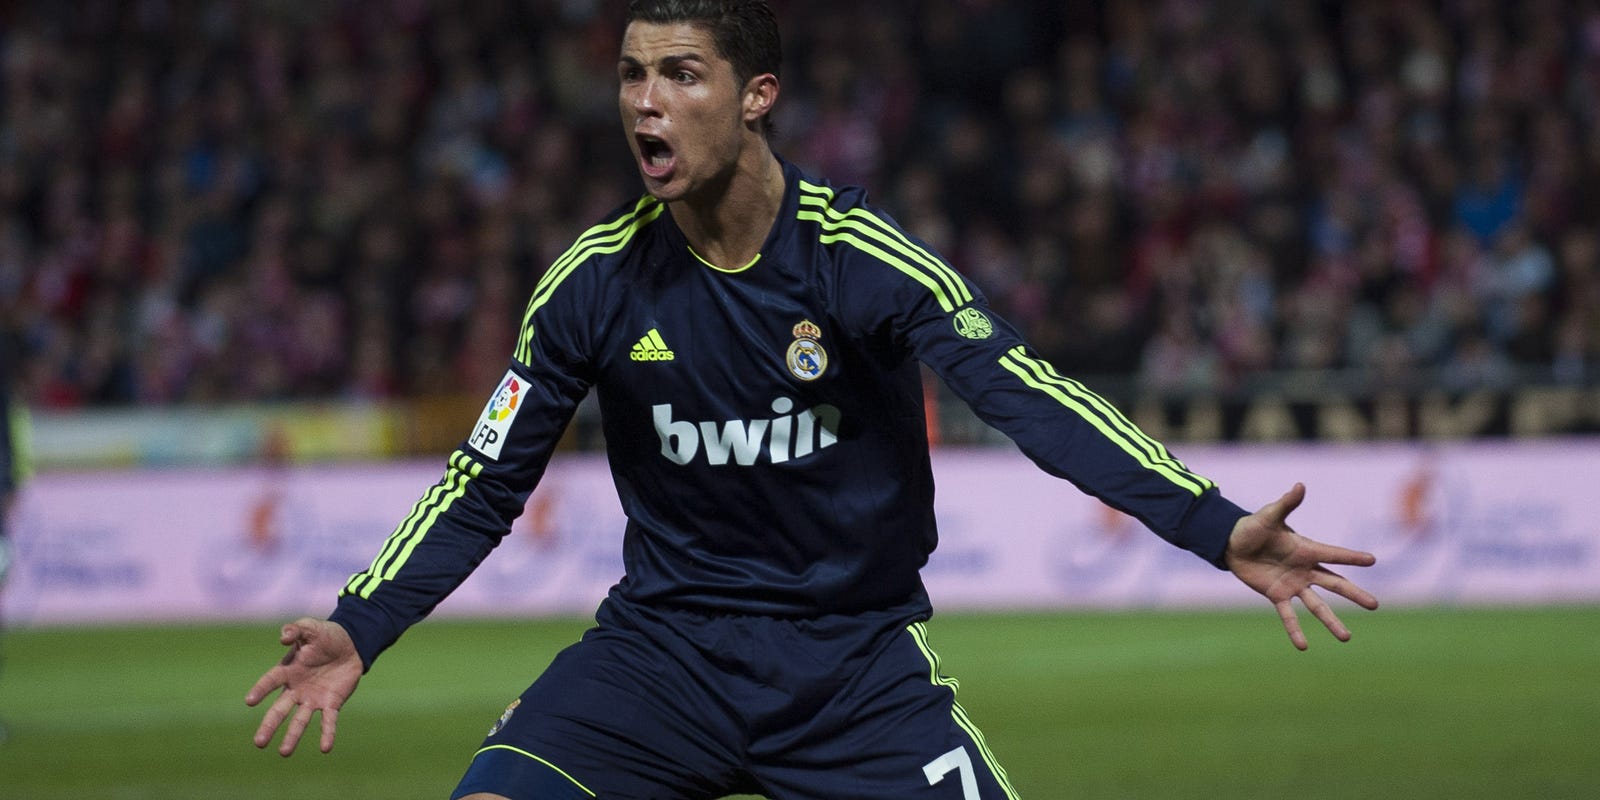 Cristiano Ronaldo scores 1st own-goal in Real Madrid loss